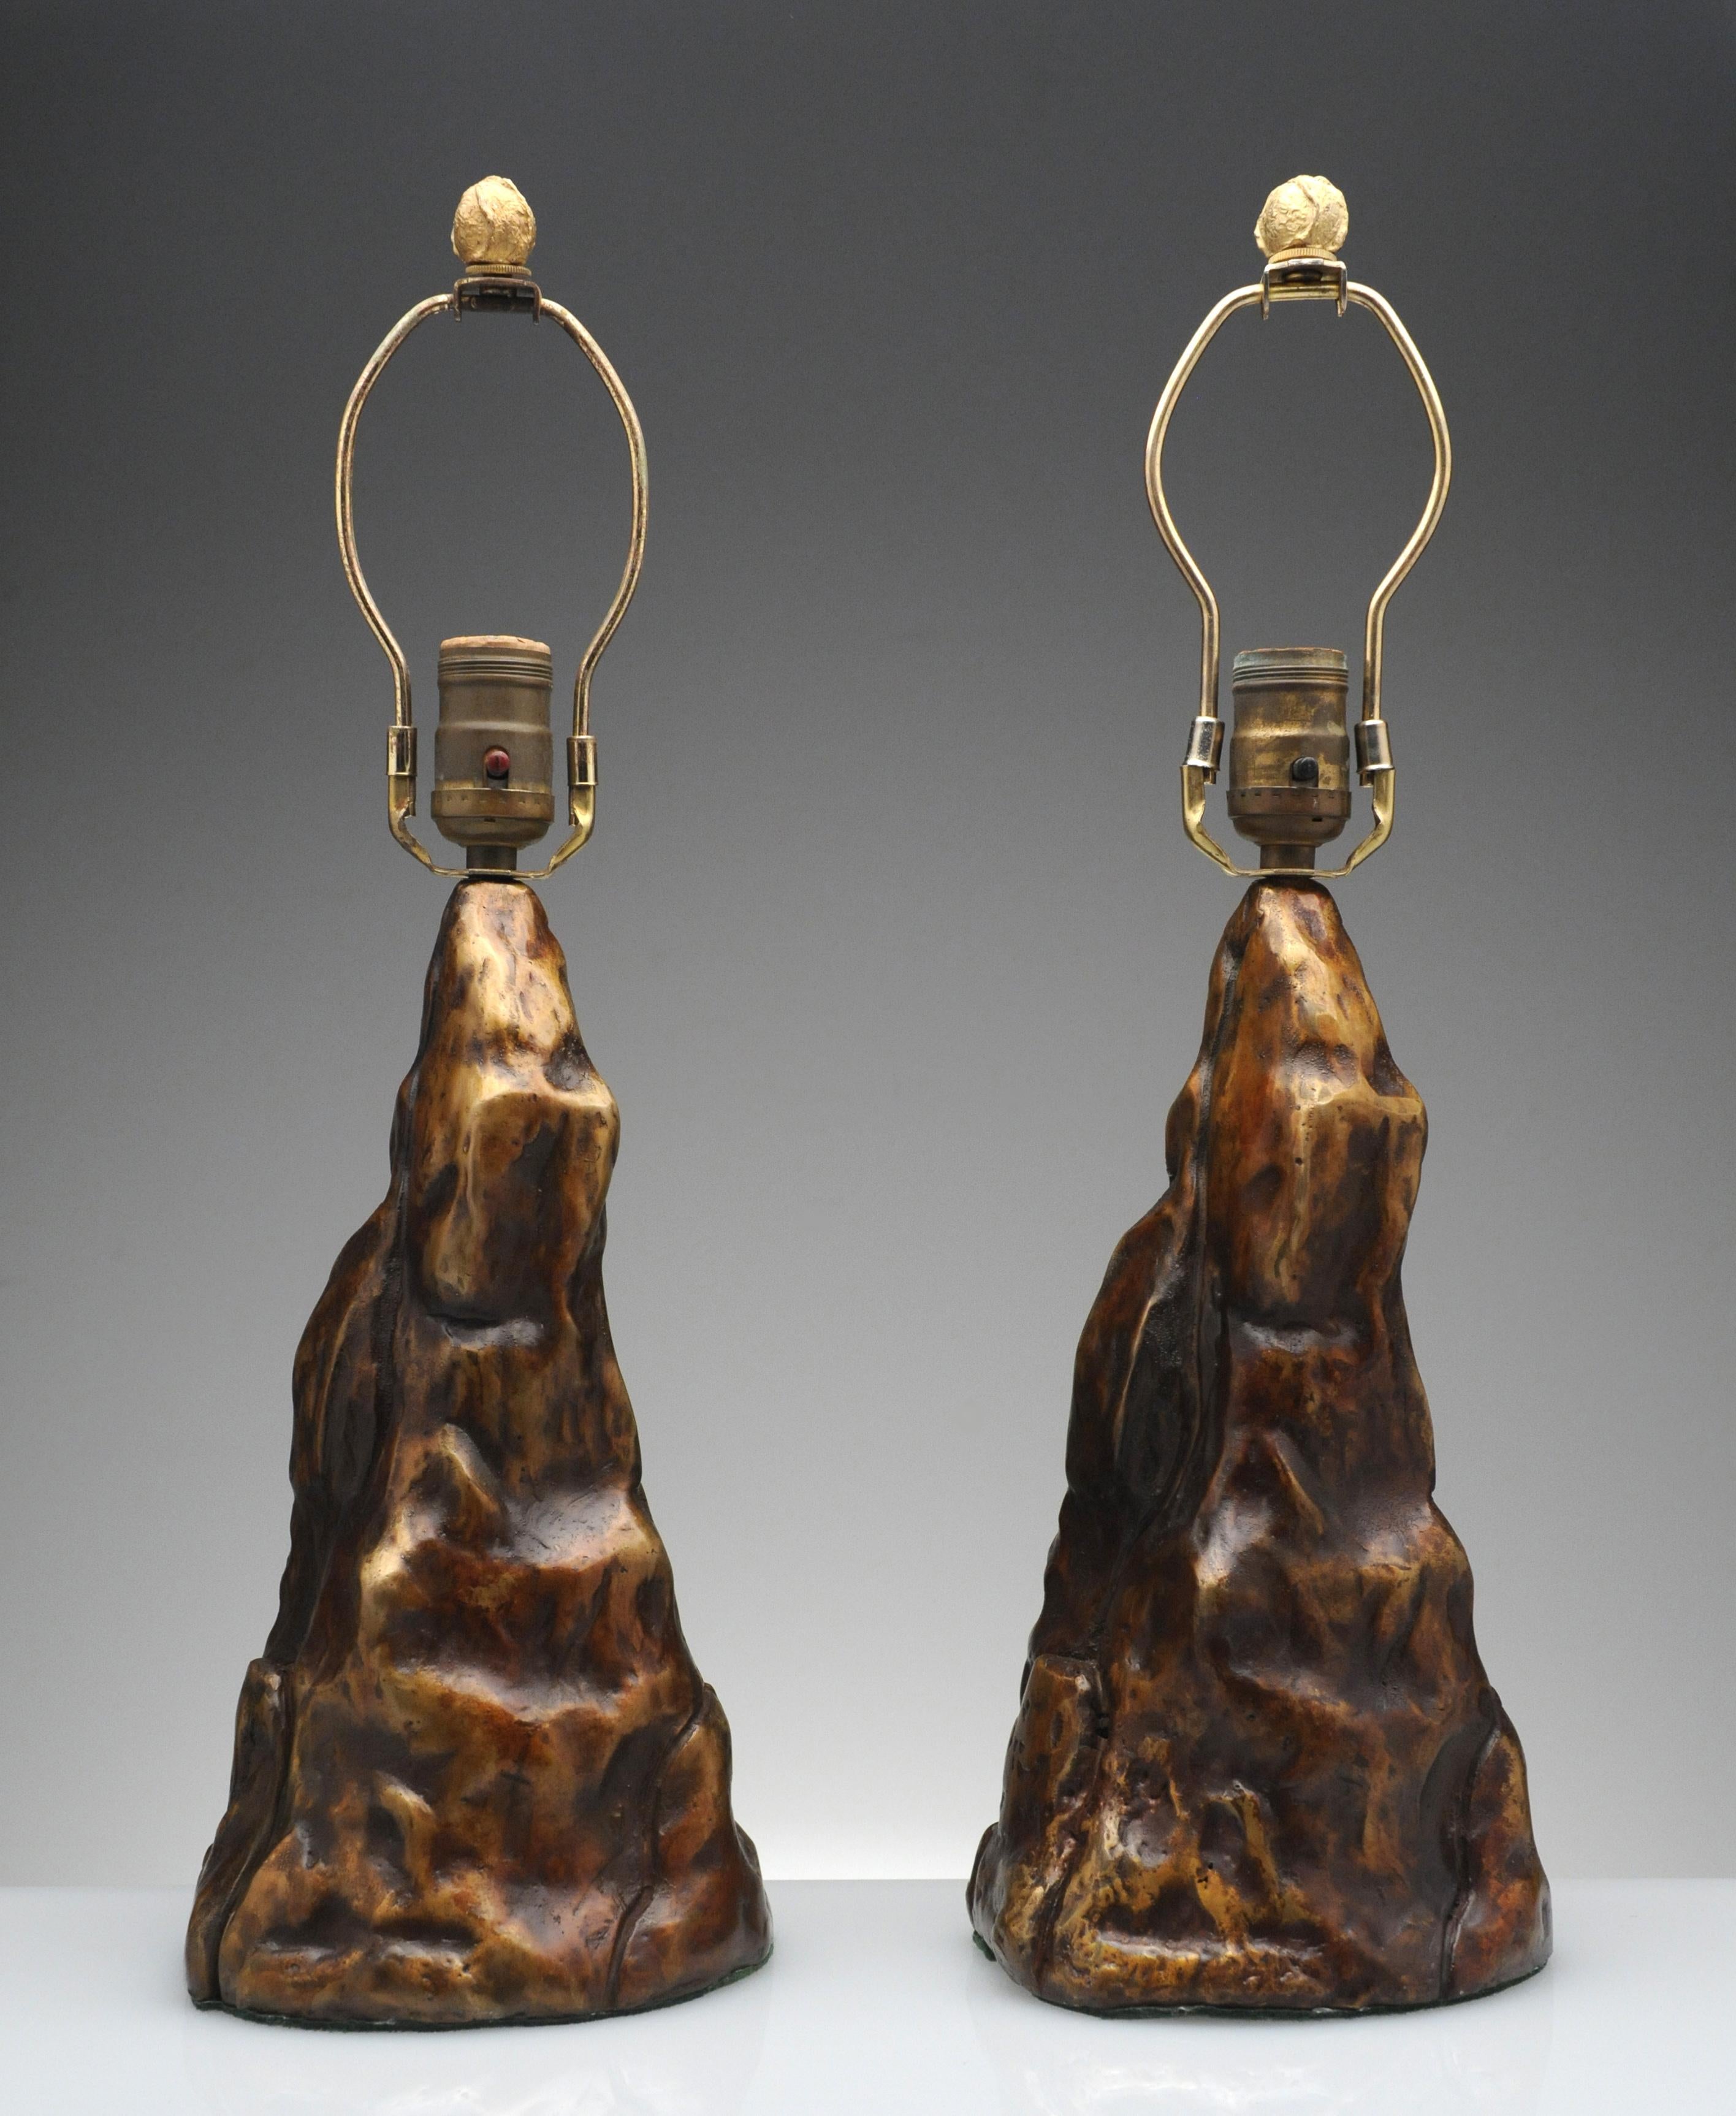 Exceptional vintage pair of bronze table lamps. Lamps retain the original bronze finial and have a beautiful warm brown patina.  These unique lamps are high quality made and heavy for their size. 